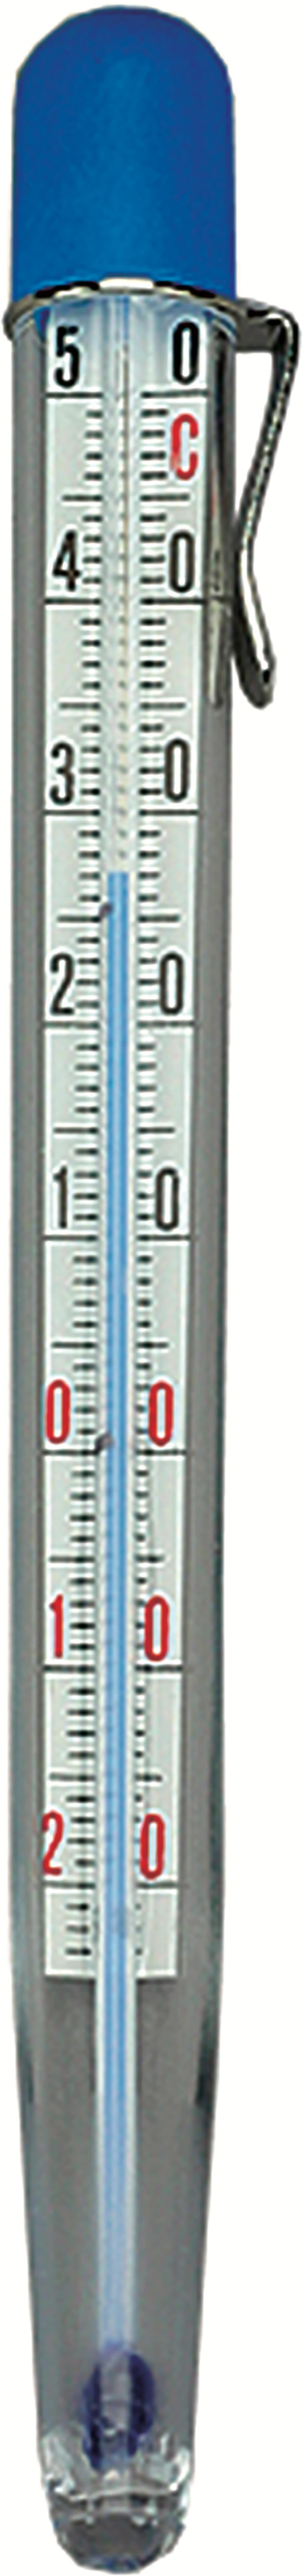 Thermometers 160004